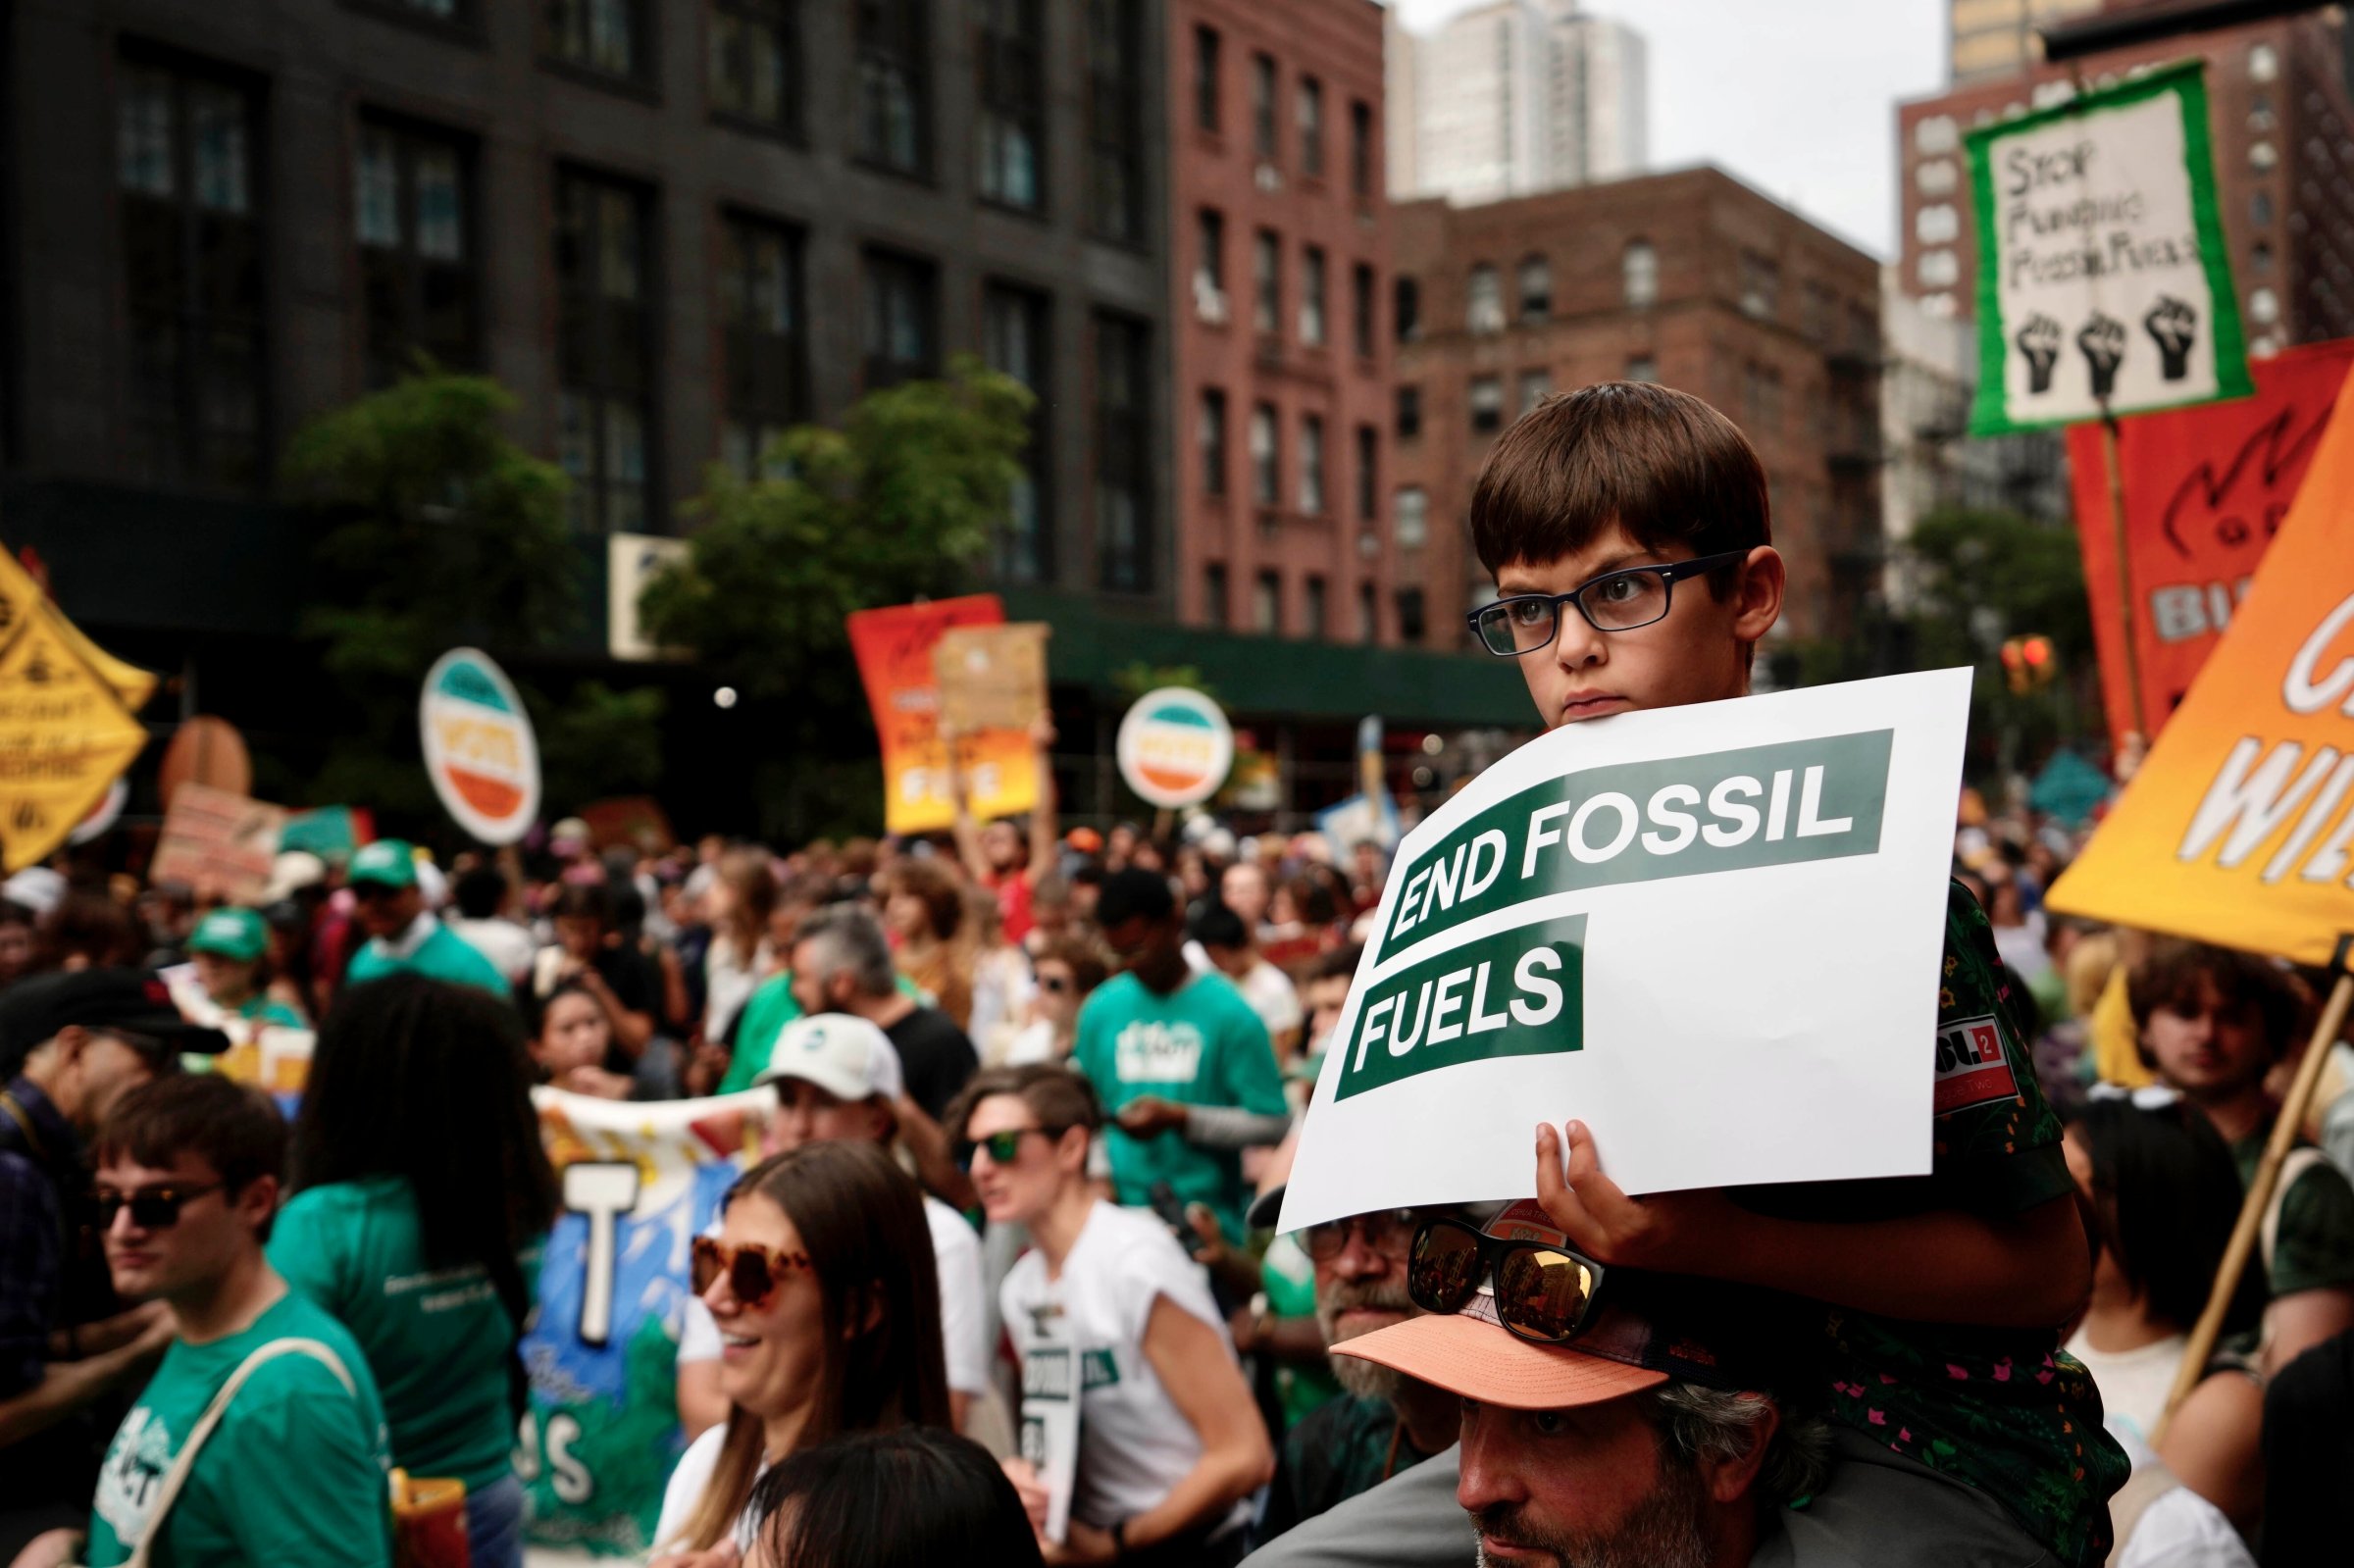 Oliver Moore, 7, of Montpelier, Vermont, listens to a speaker during a rally to end the use of fossil fuels, in New York, Sept. 17, 2023.